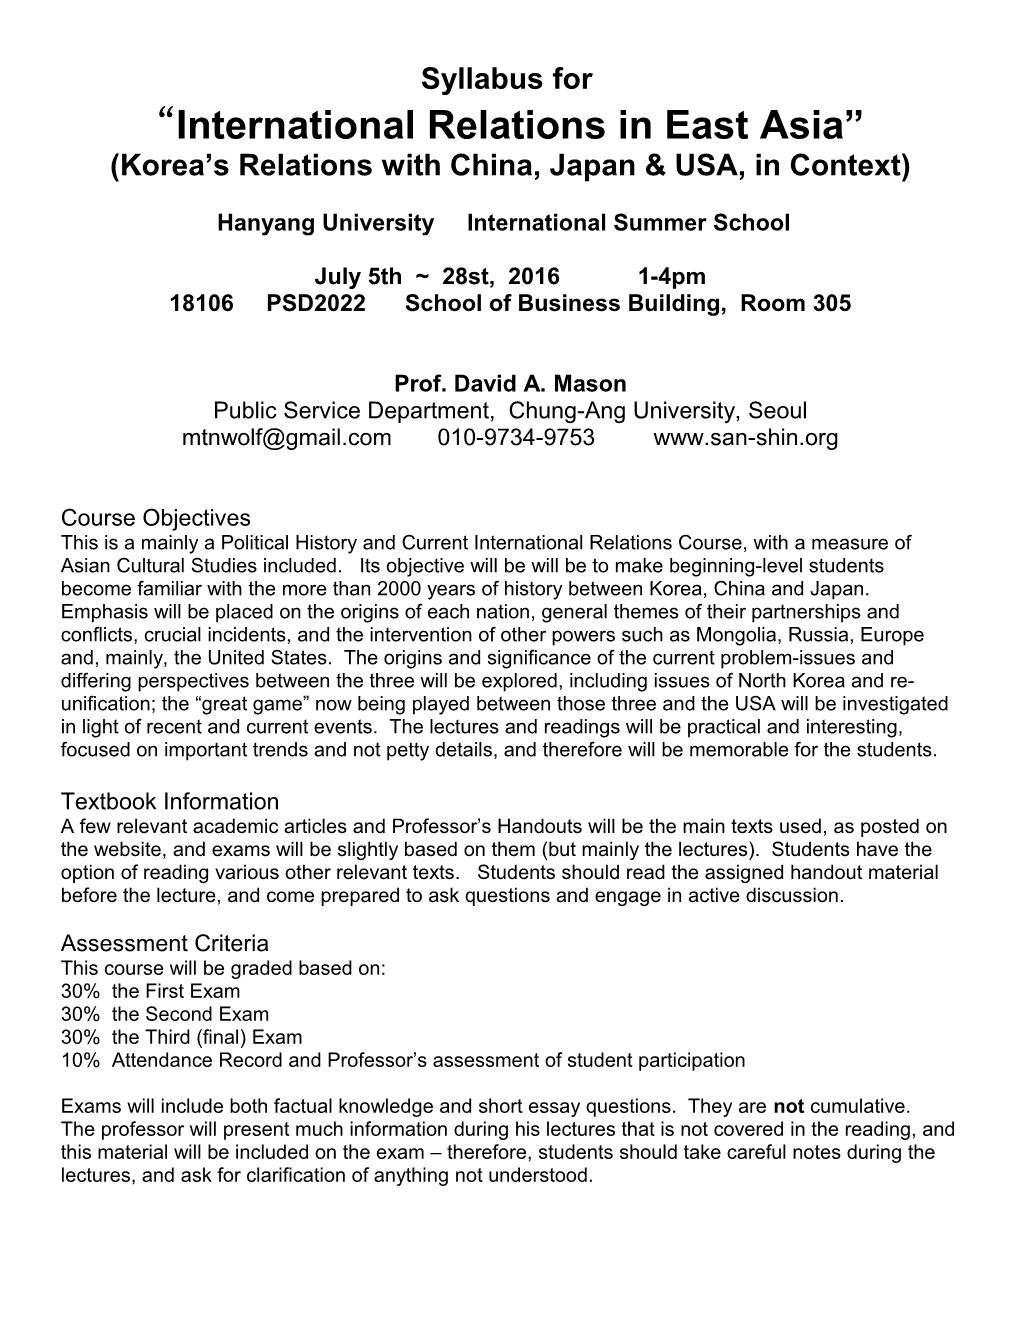 Syllabus for Korea S Relations with China and Japan